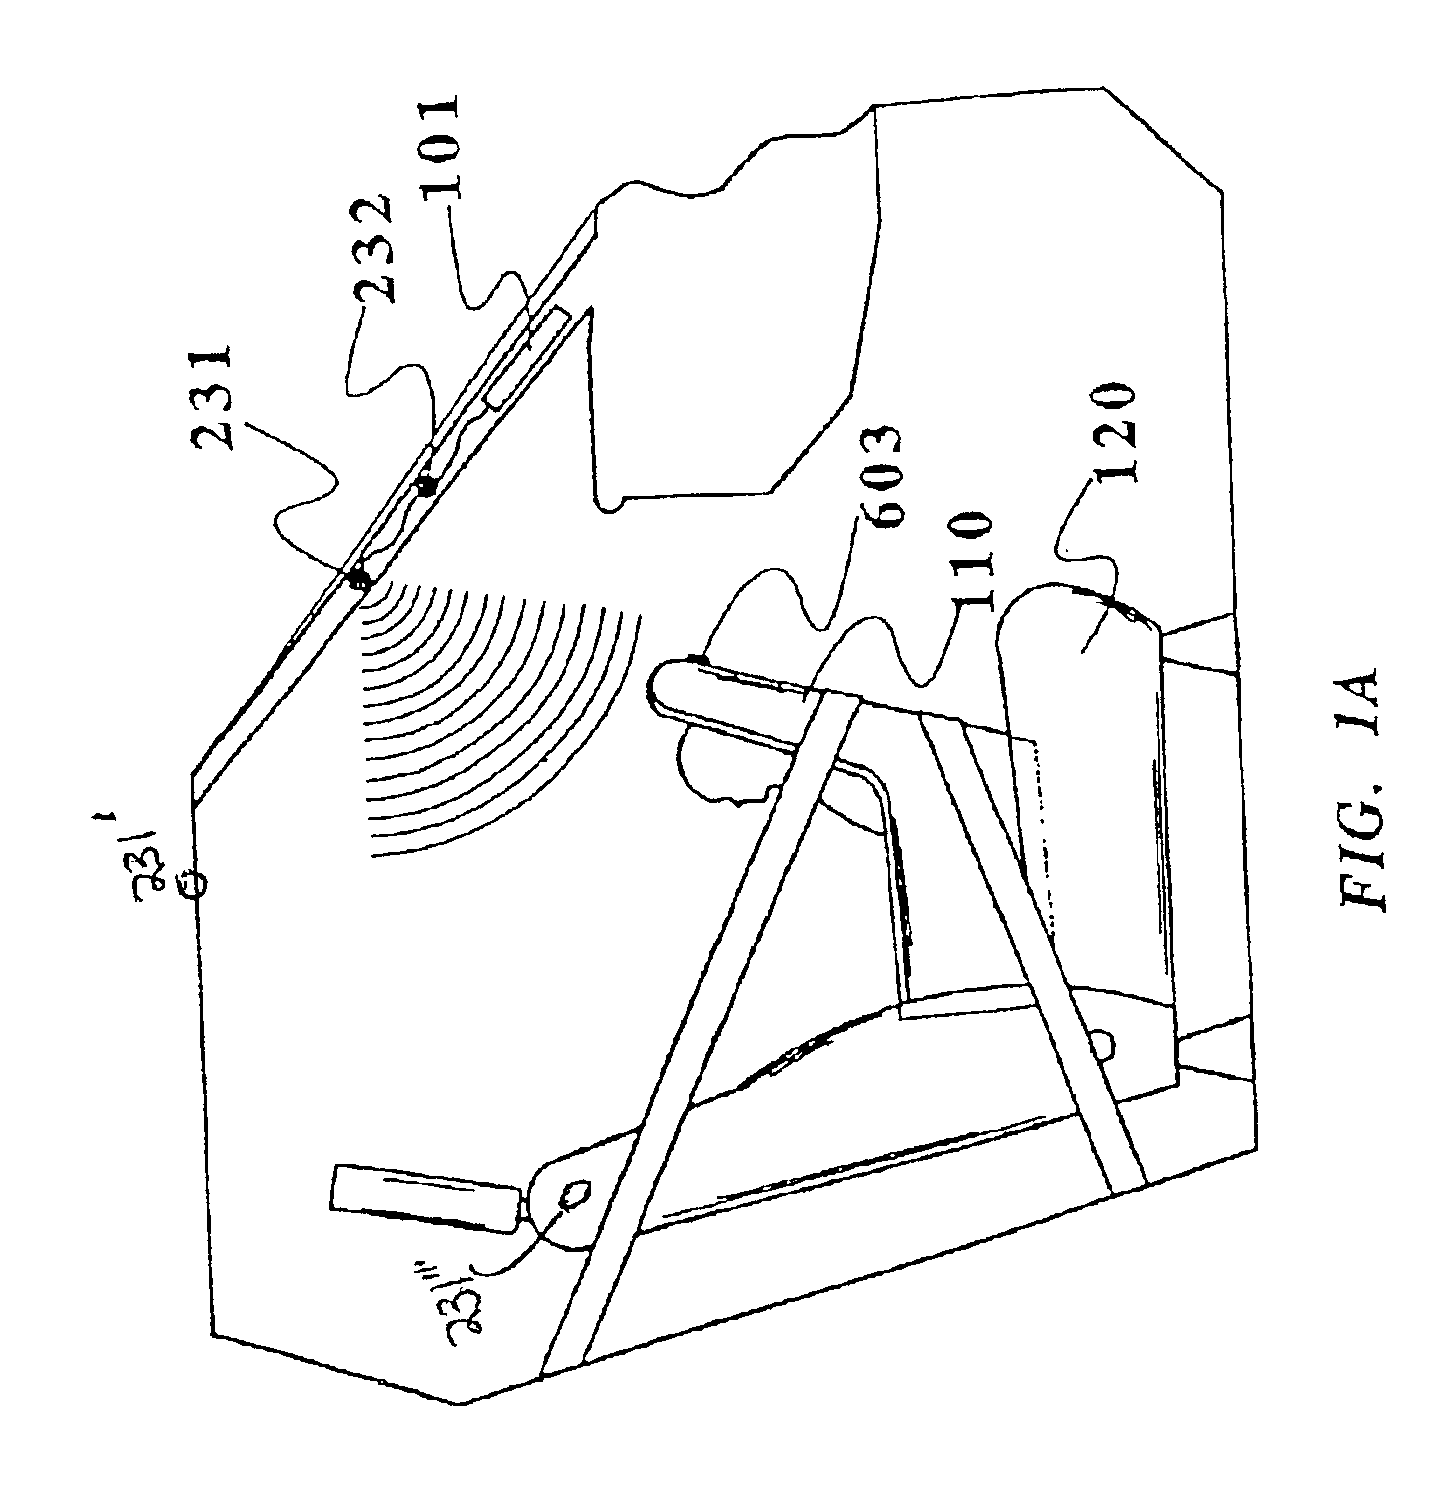 Occupant restraint device control system and method